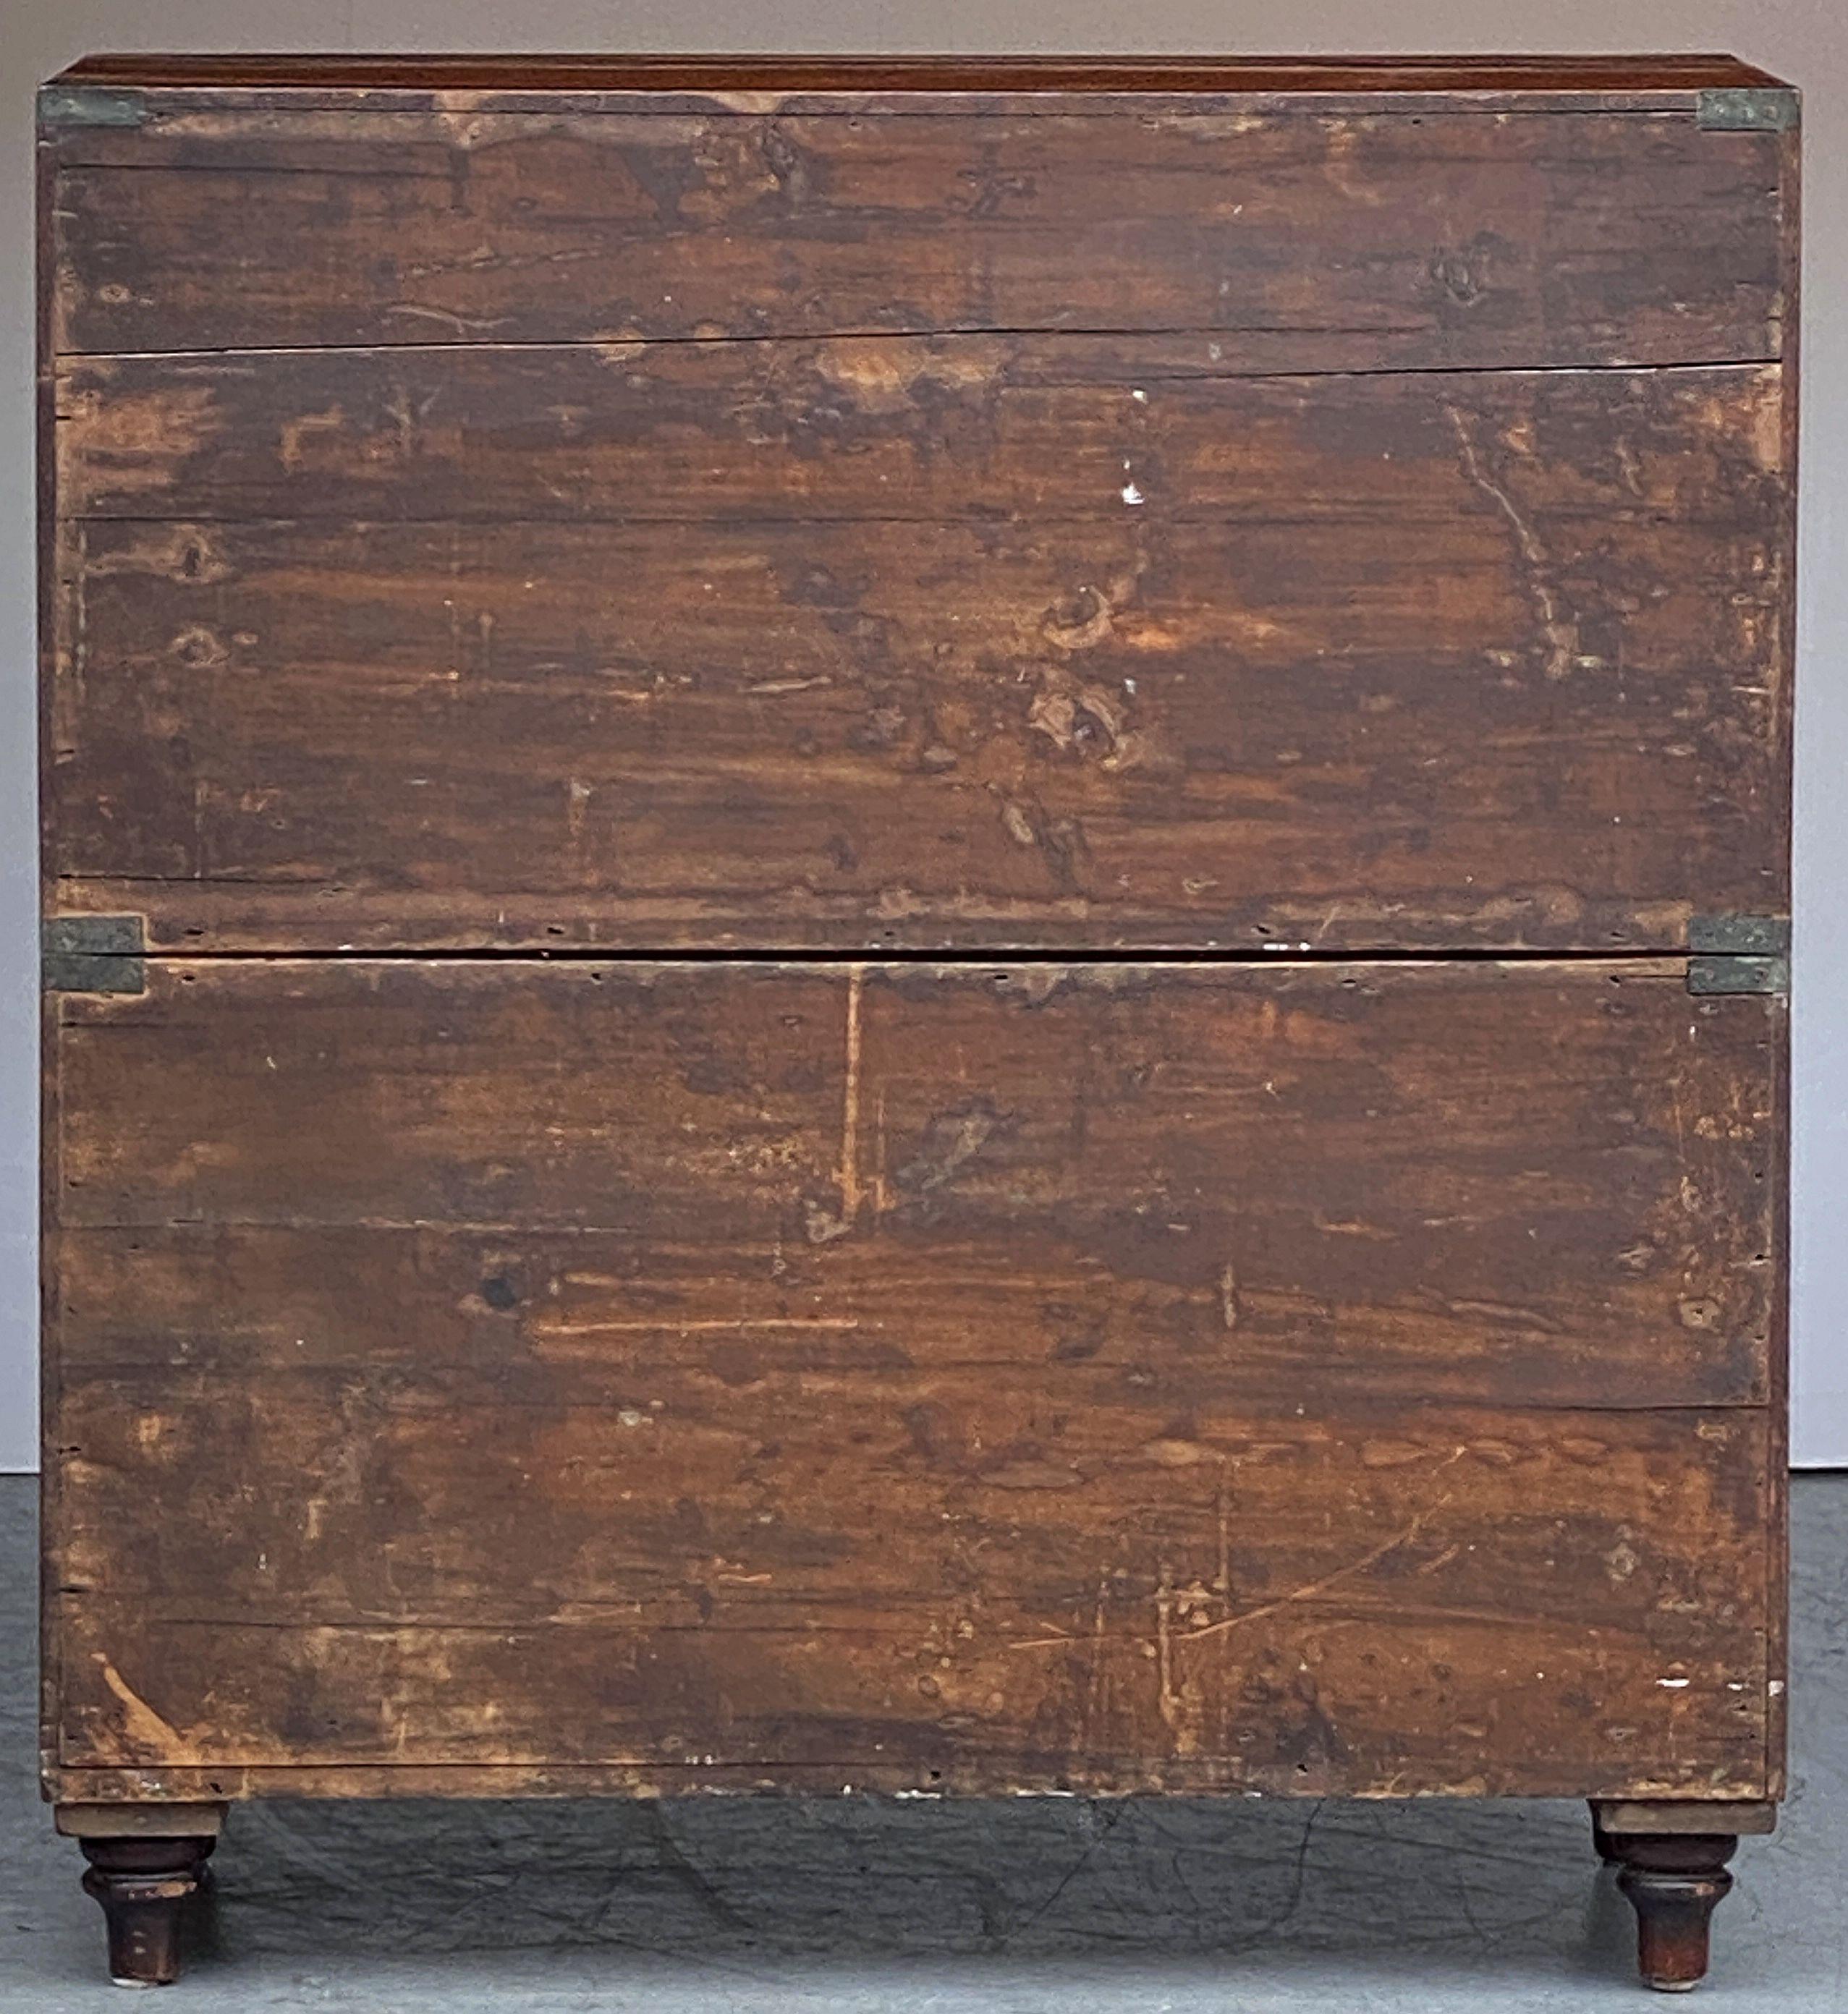 British Military Officer's Campaign Chest or Dresser of Brass-Bound Mahogany For Sale 11